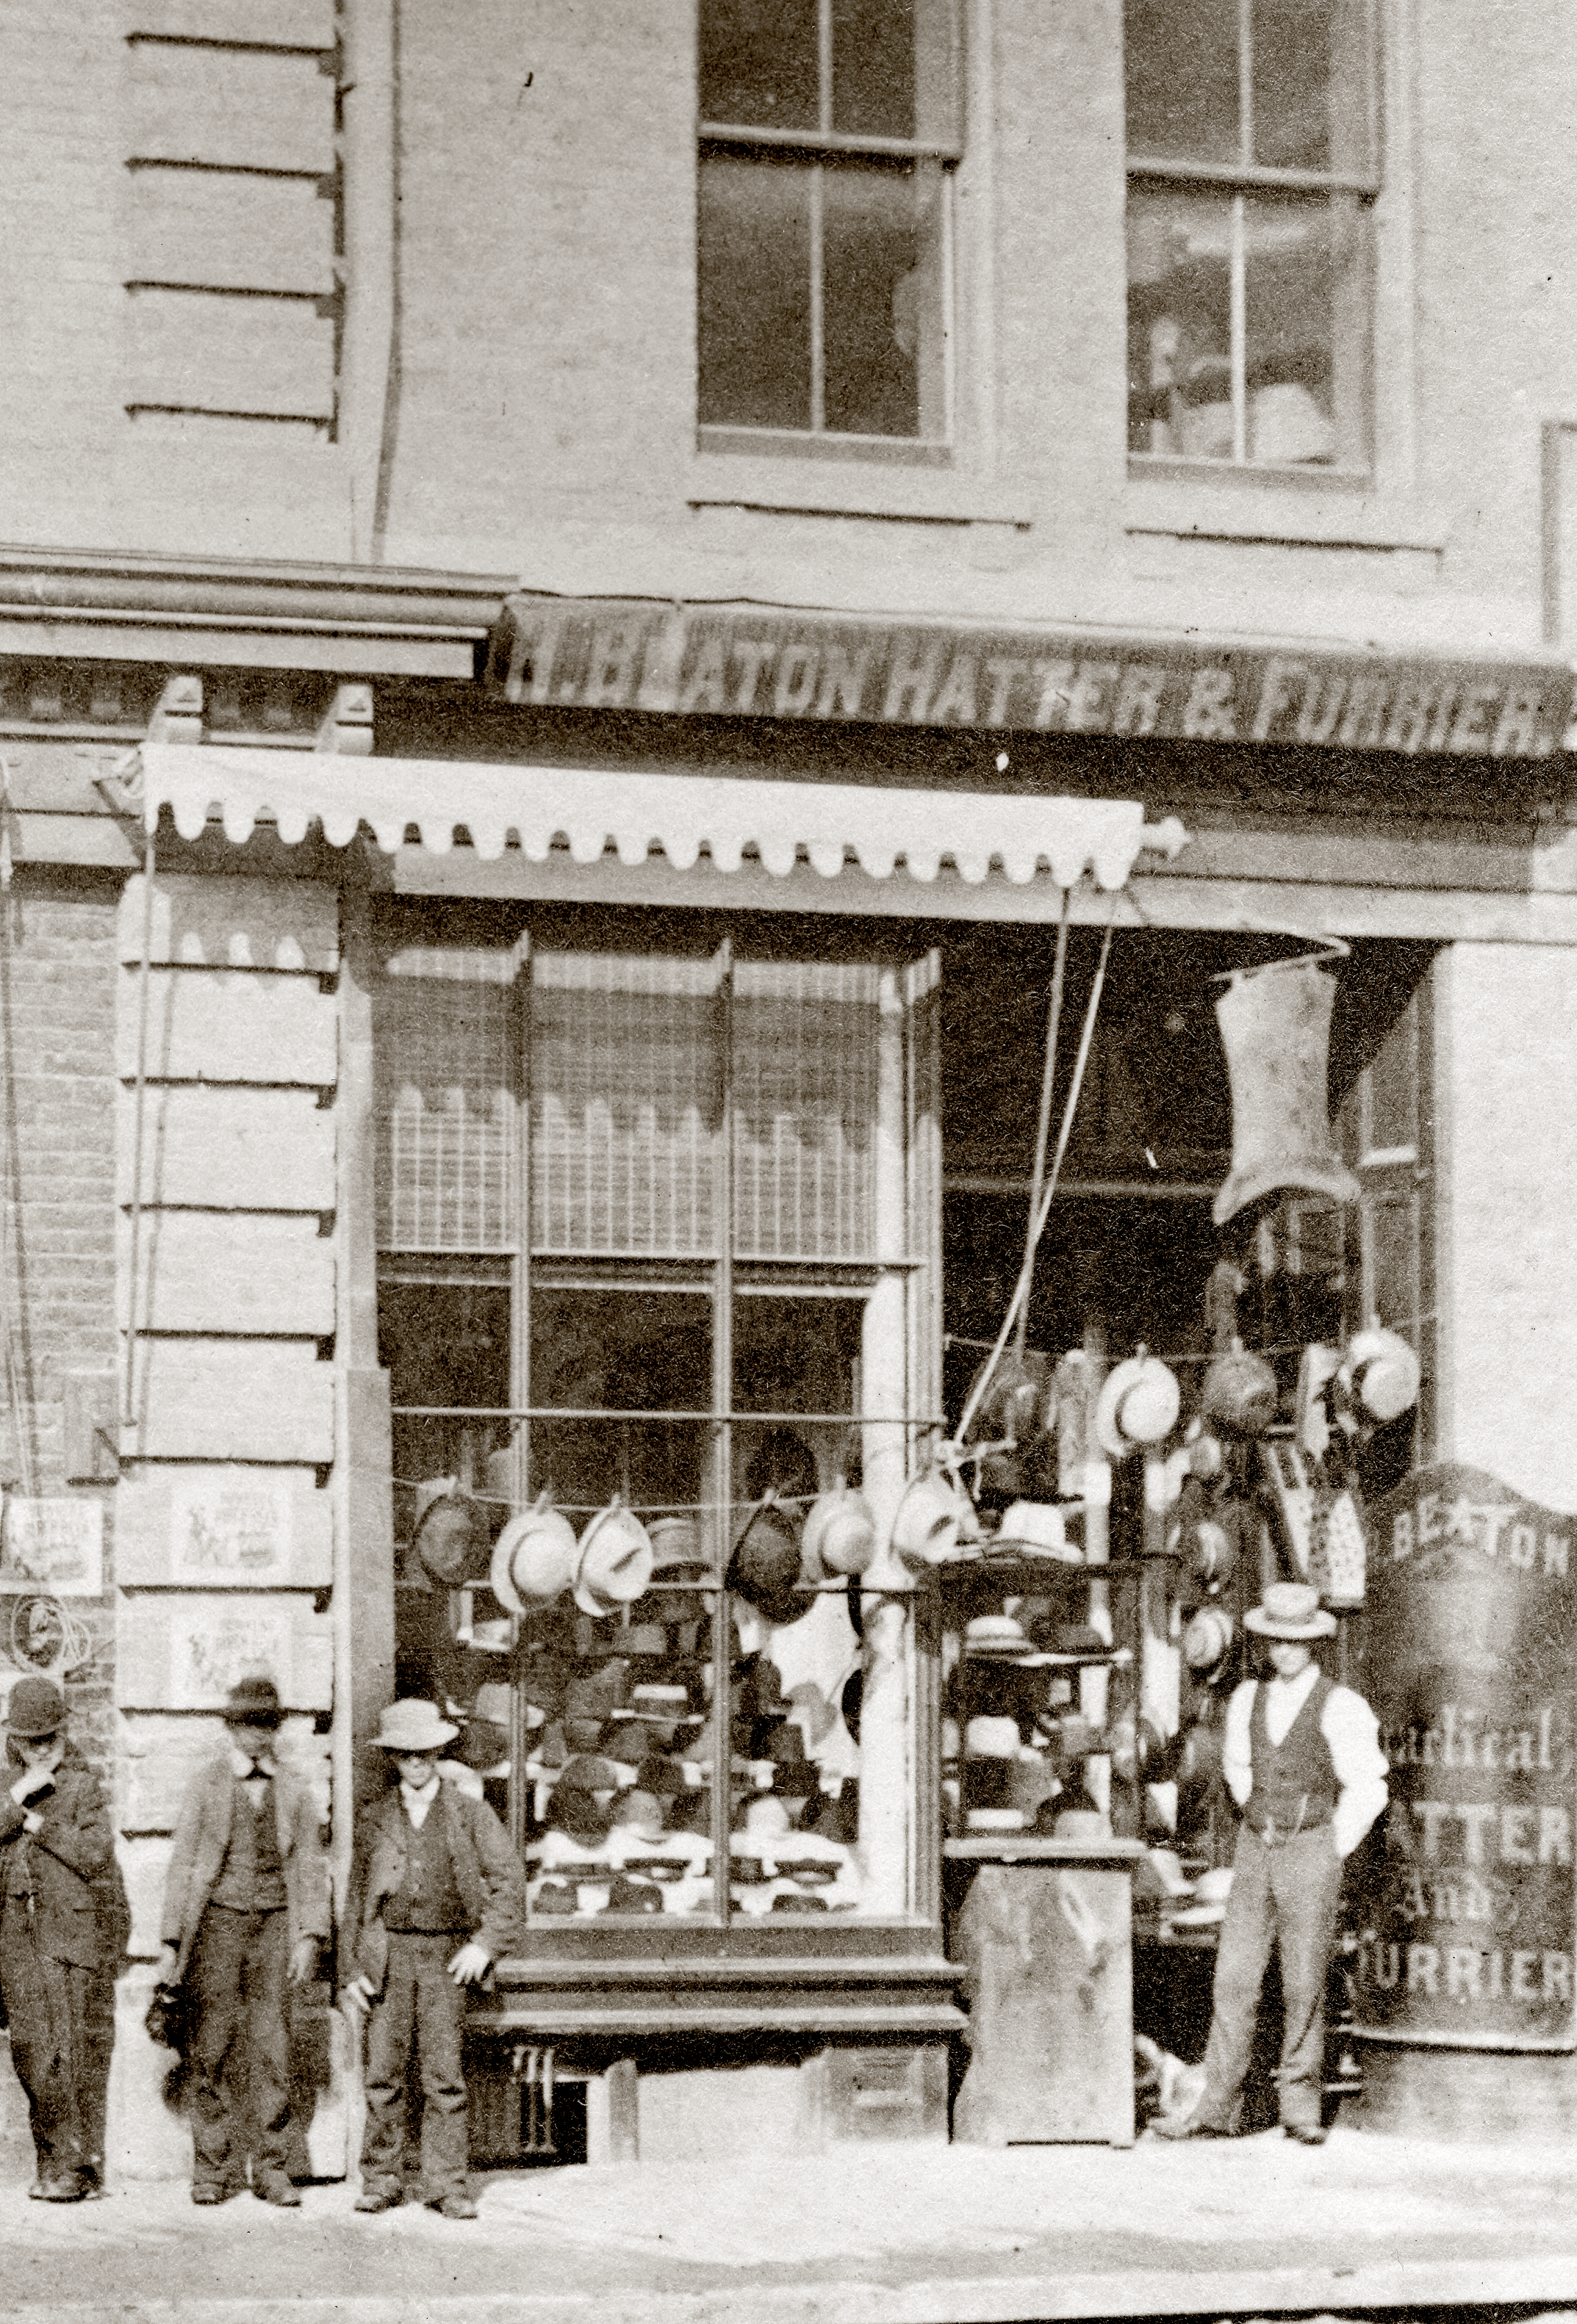 Image of the exterior of H. Beaton Clothing and Furrier.